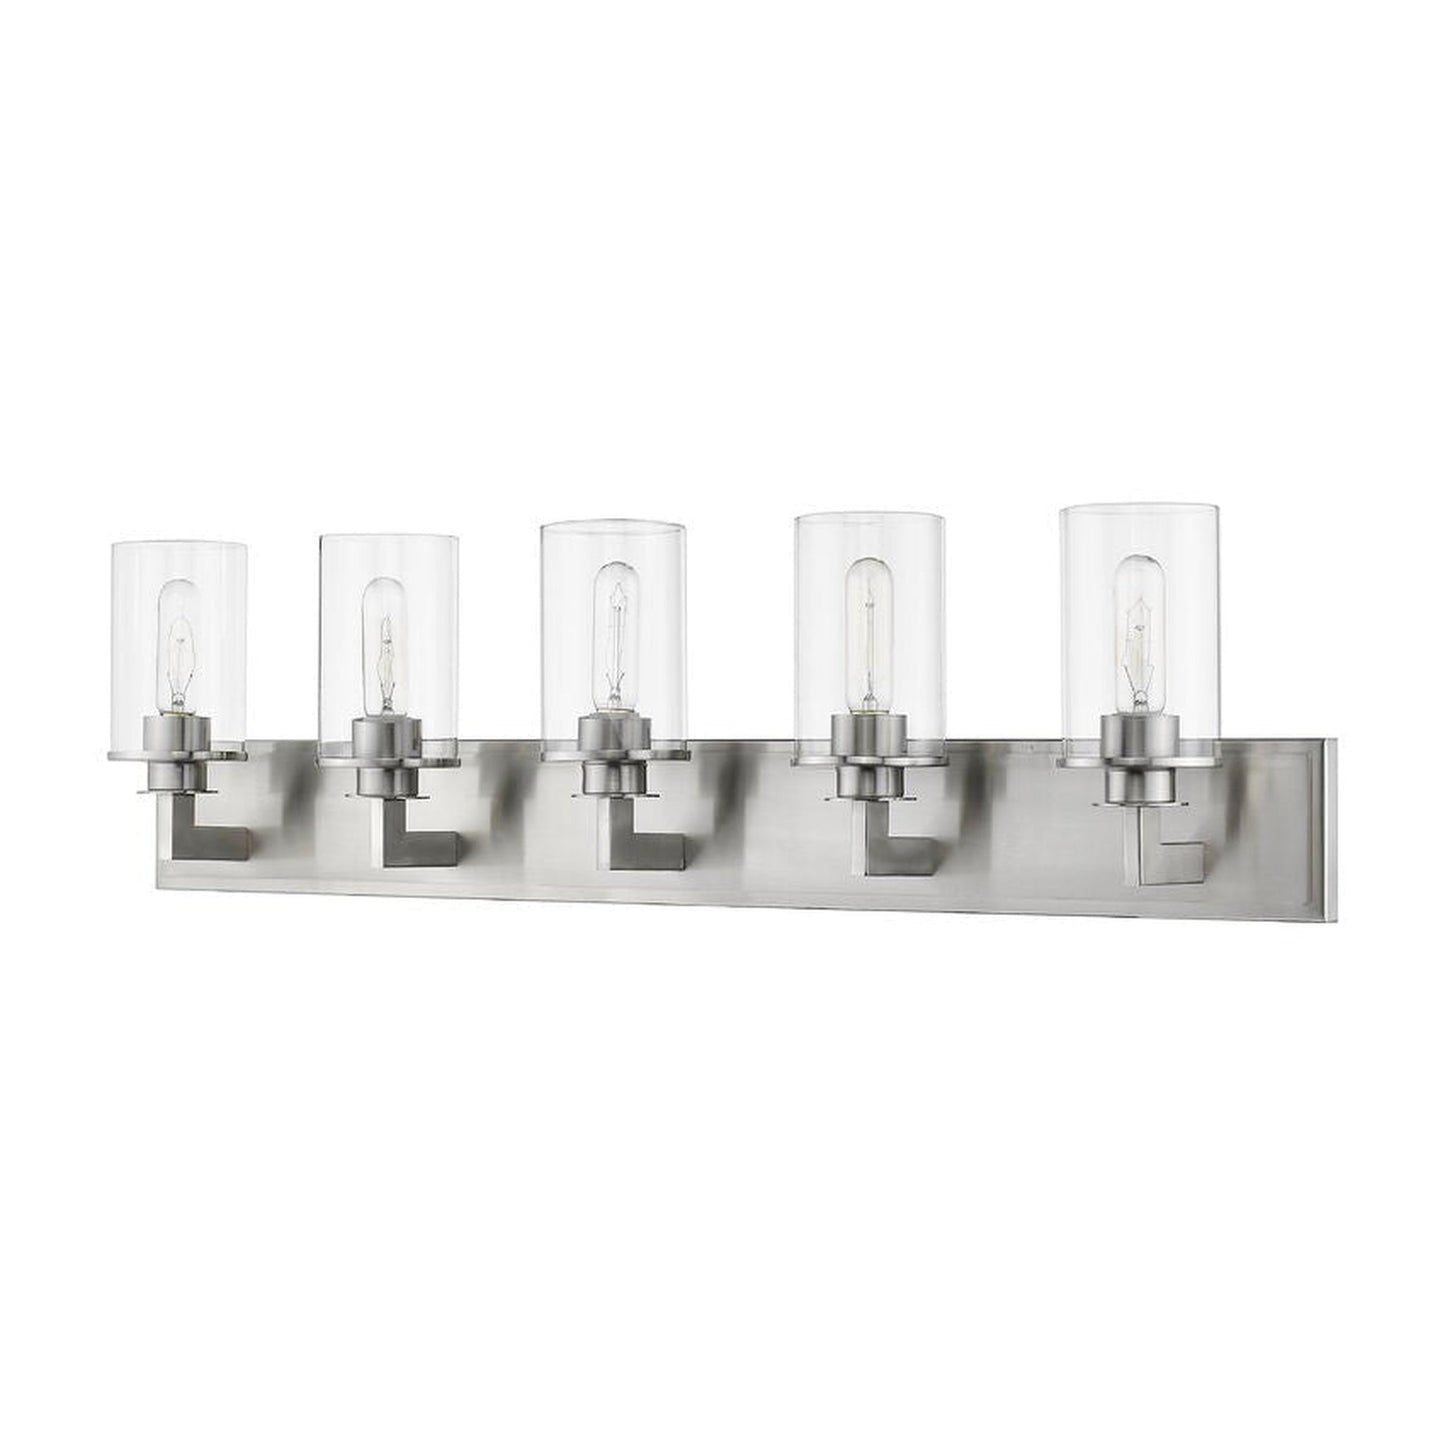 Z-Lite Savannah 39" 5-Light Brushed Nickel Vanity Light With Clear Glass Shade